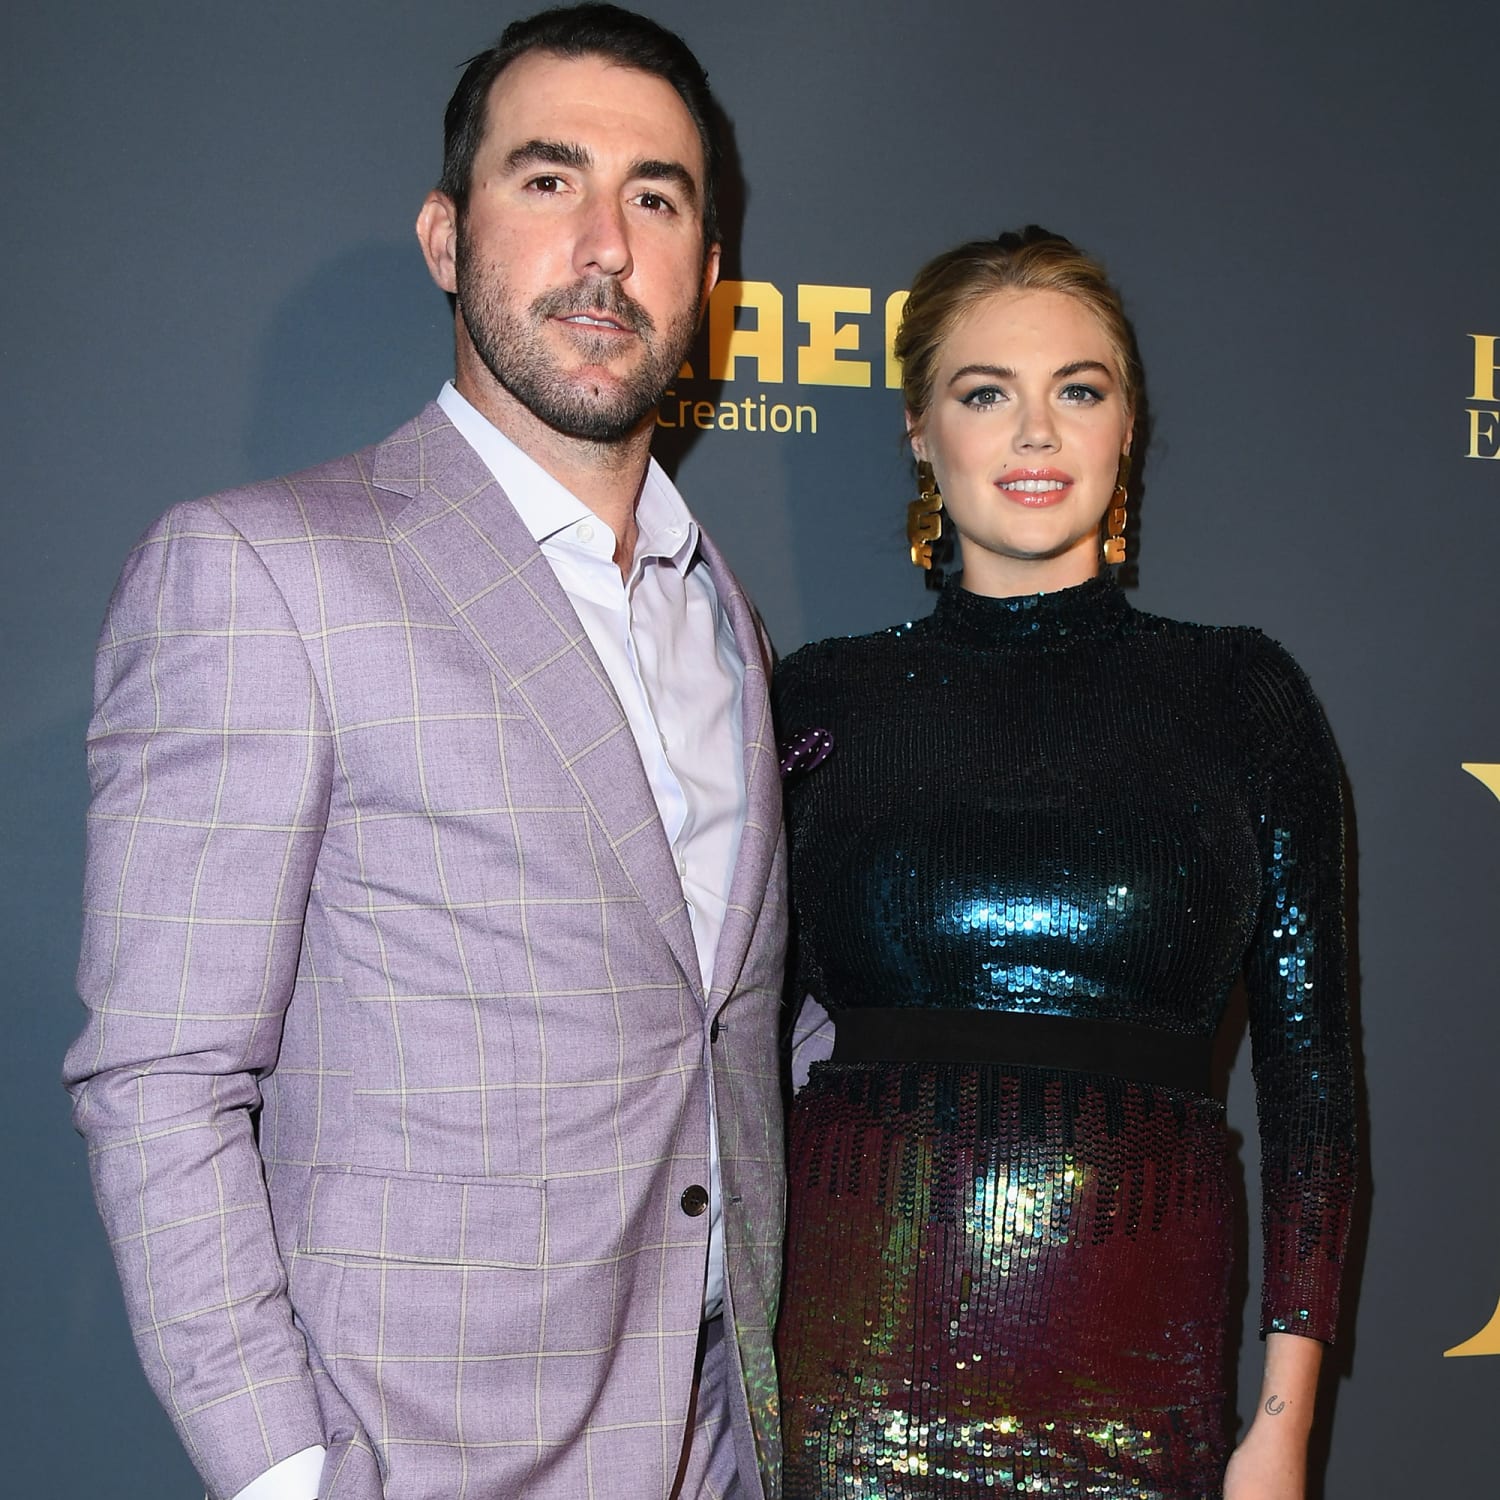 Who Is Kate Upton's Husband? All You Need To Know!